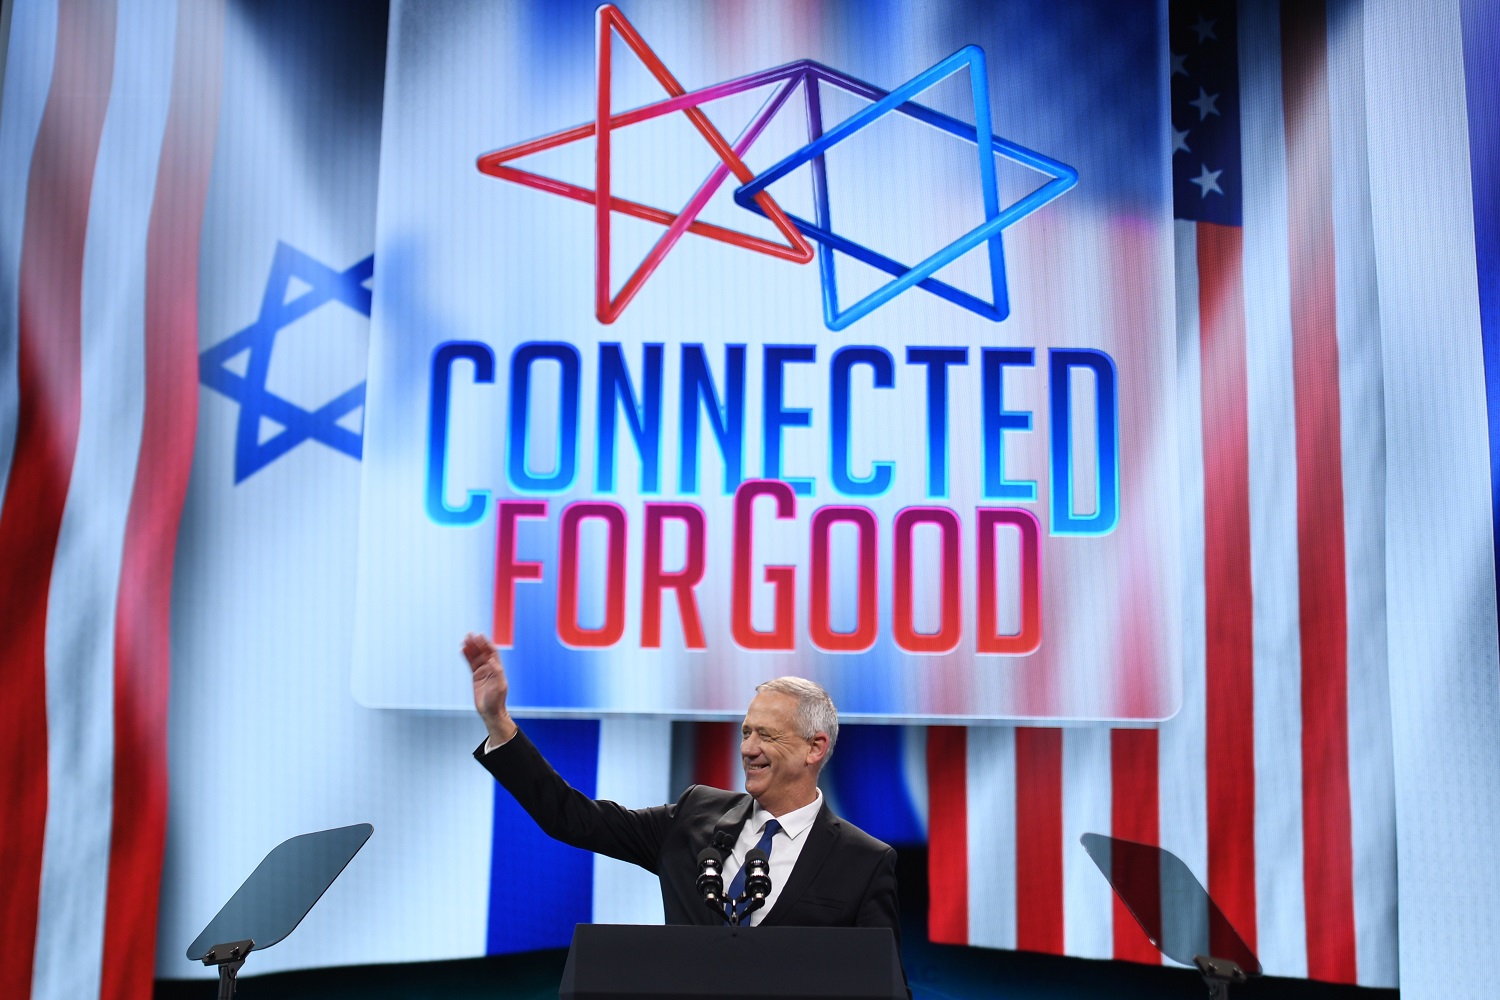 Benny Gantz at the AIPAC annual meeting in Washington in March 2019 (AFP)